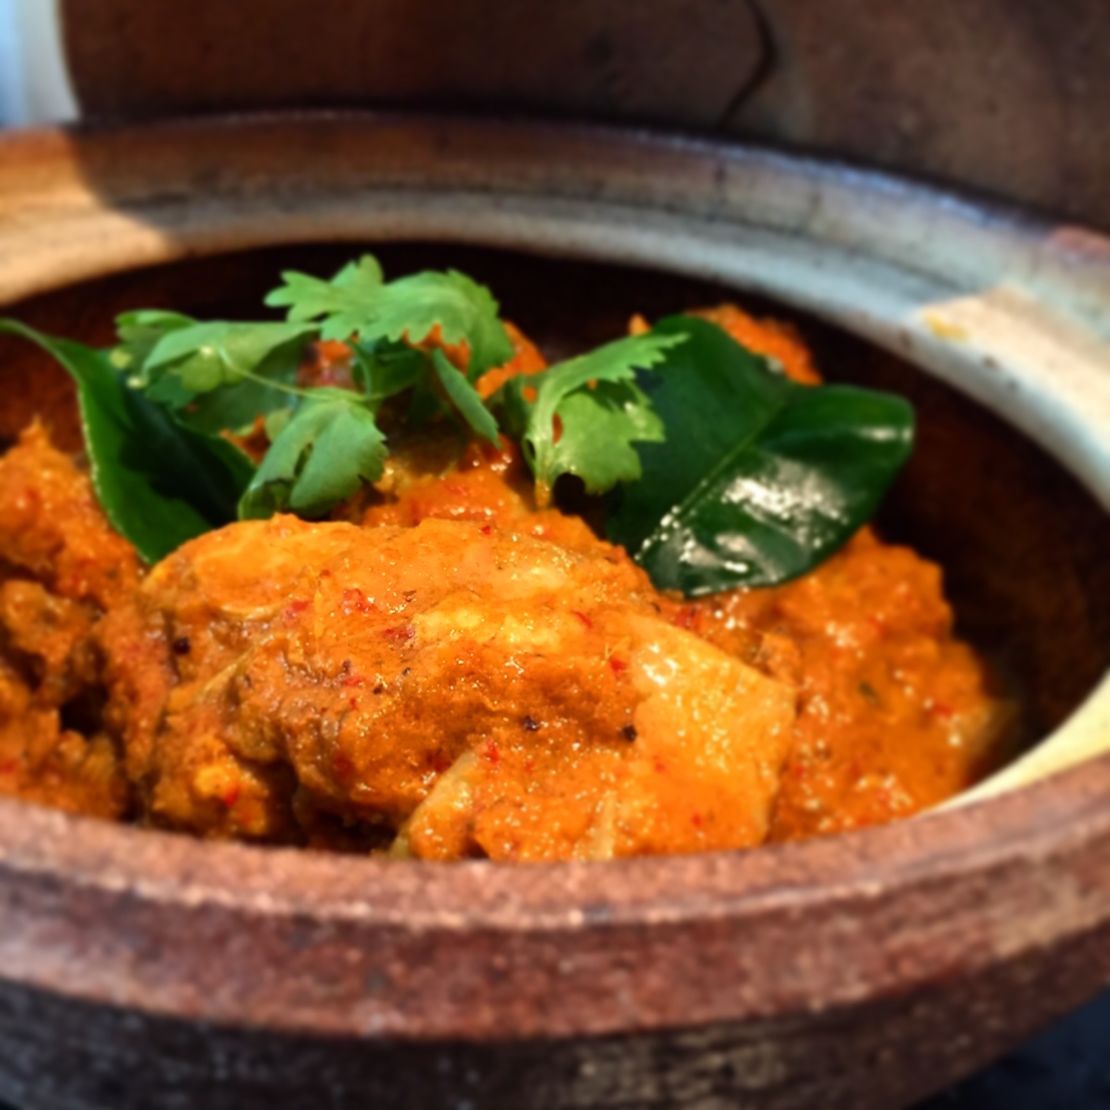 Chicken curry kapitan is made from tamarind juice, candlenuts, fresh turmeric root and belacan (shrimp paste.)